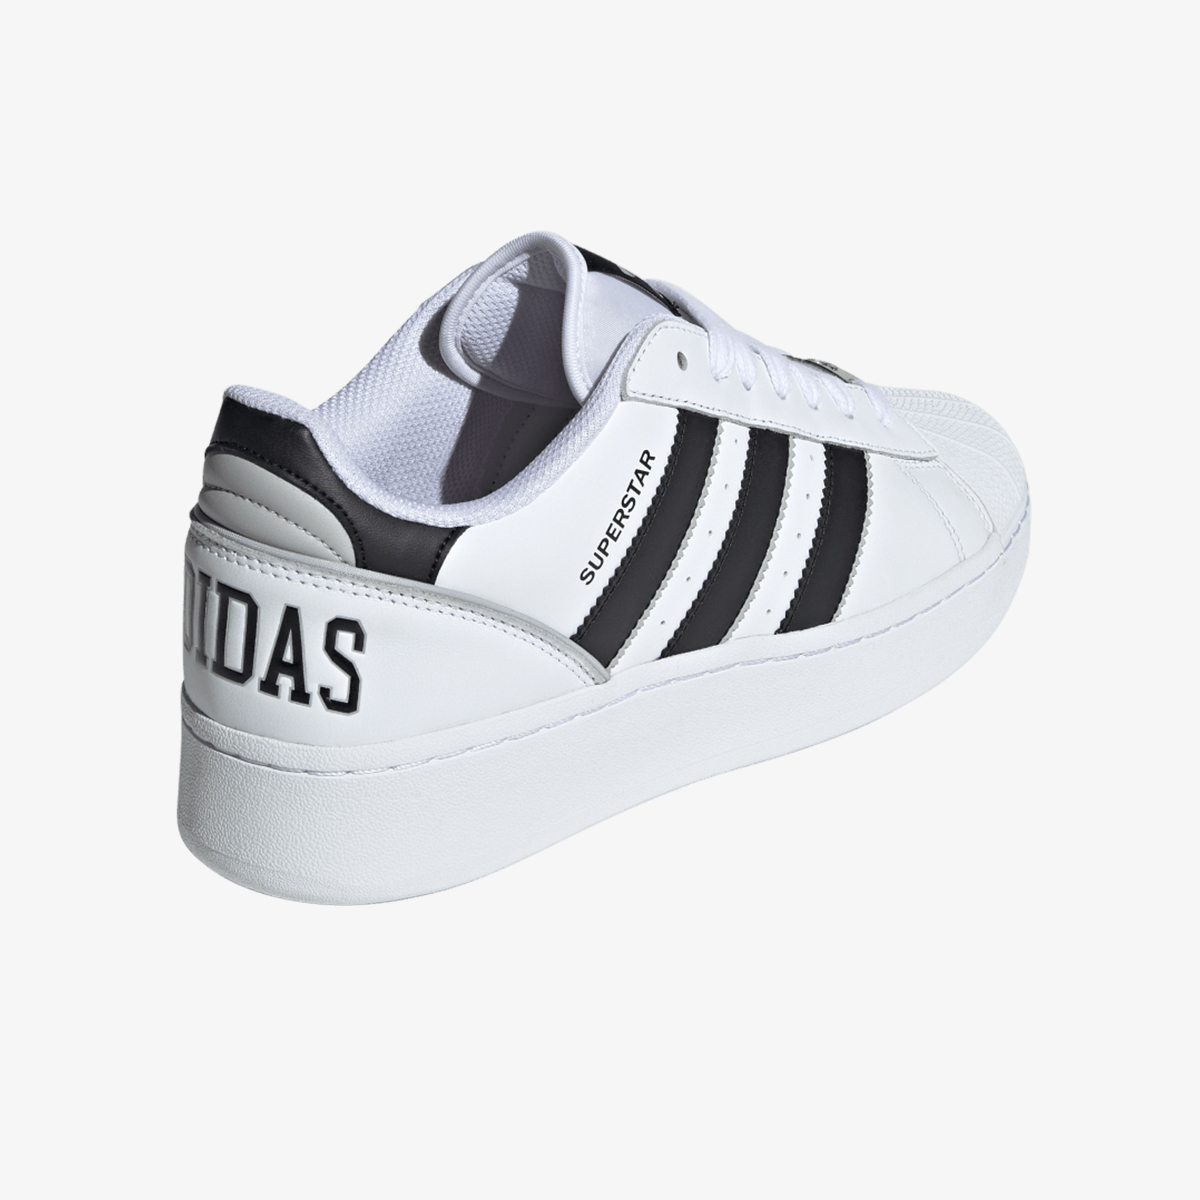 adidas Patike SUPERSTAR XLG T 